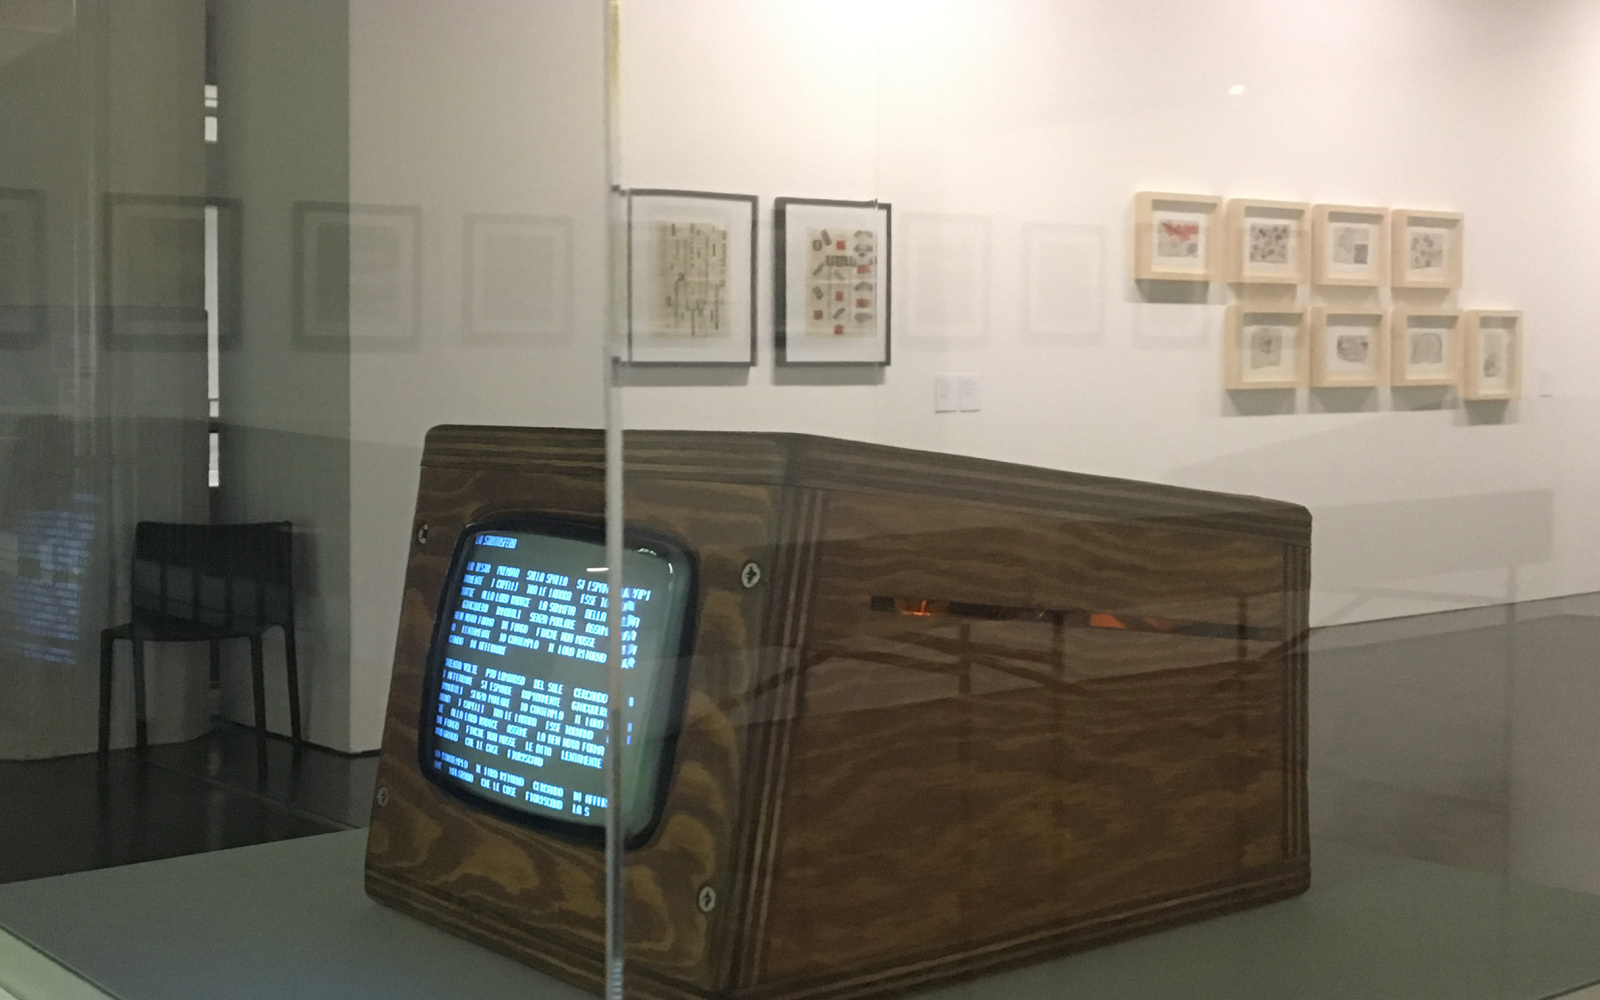 Photo of the reconstruction of the poem "Tape Mark I" by Nanni Balestrini: a small wooden box with a screen